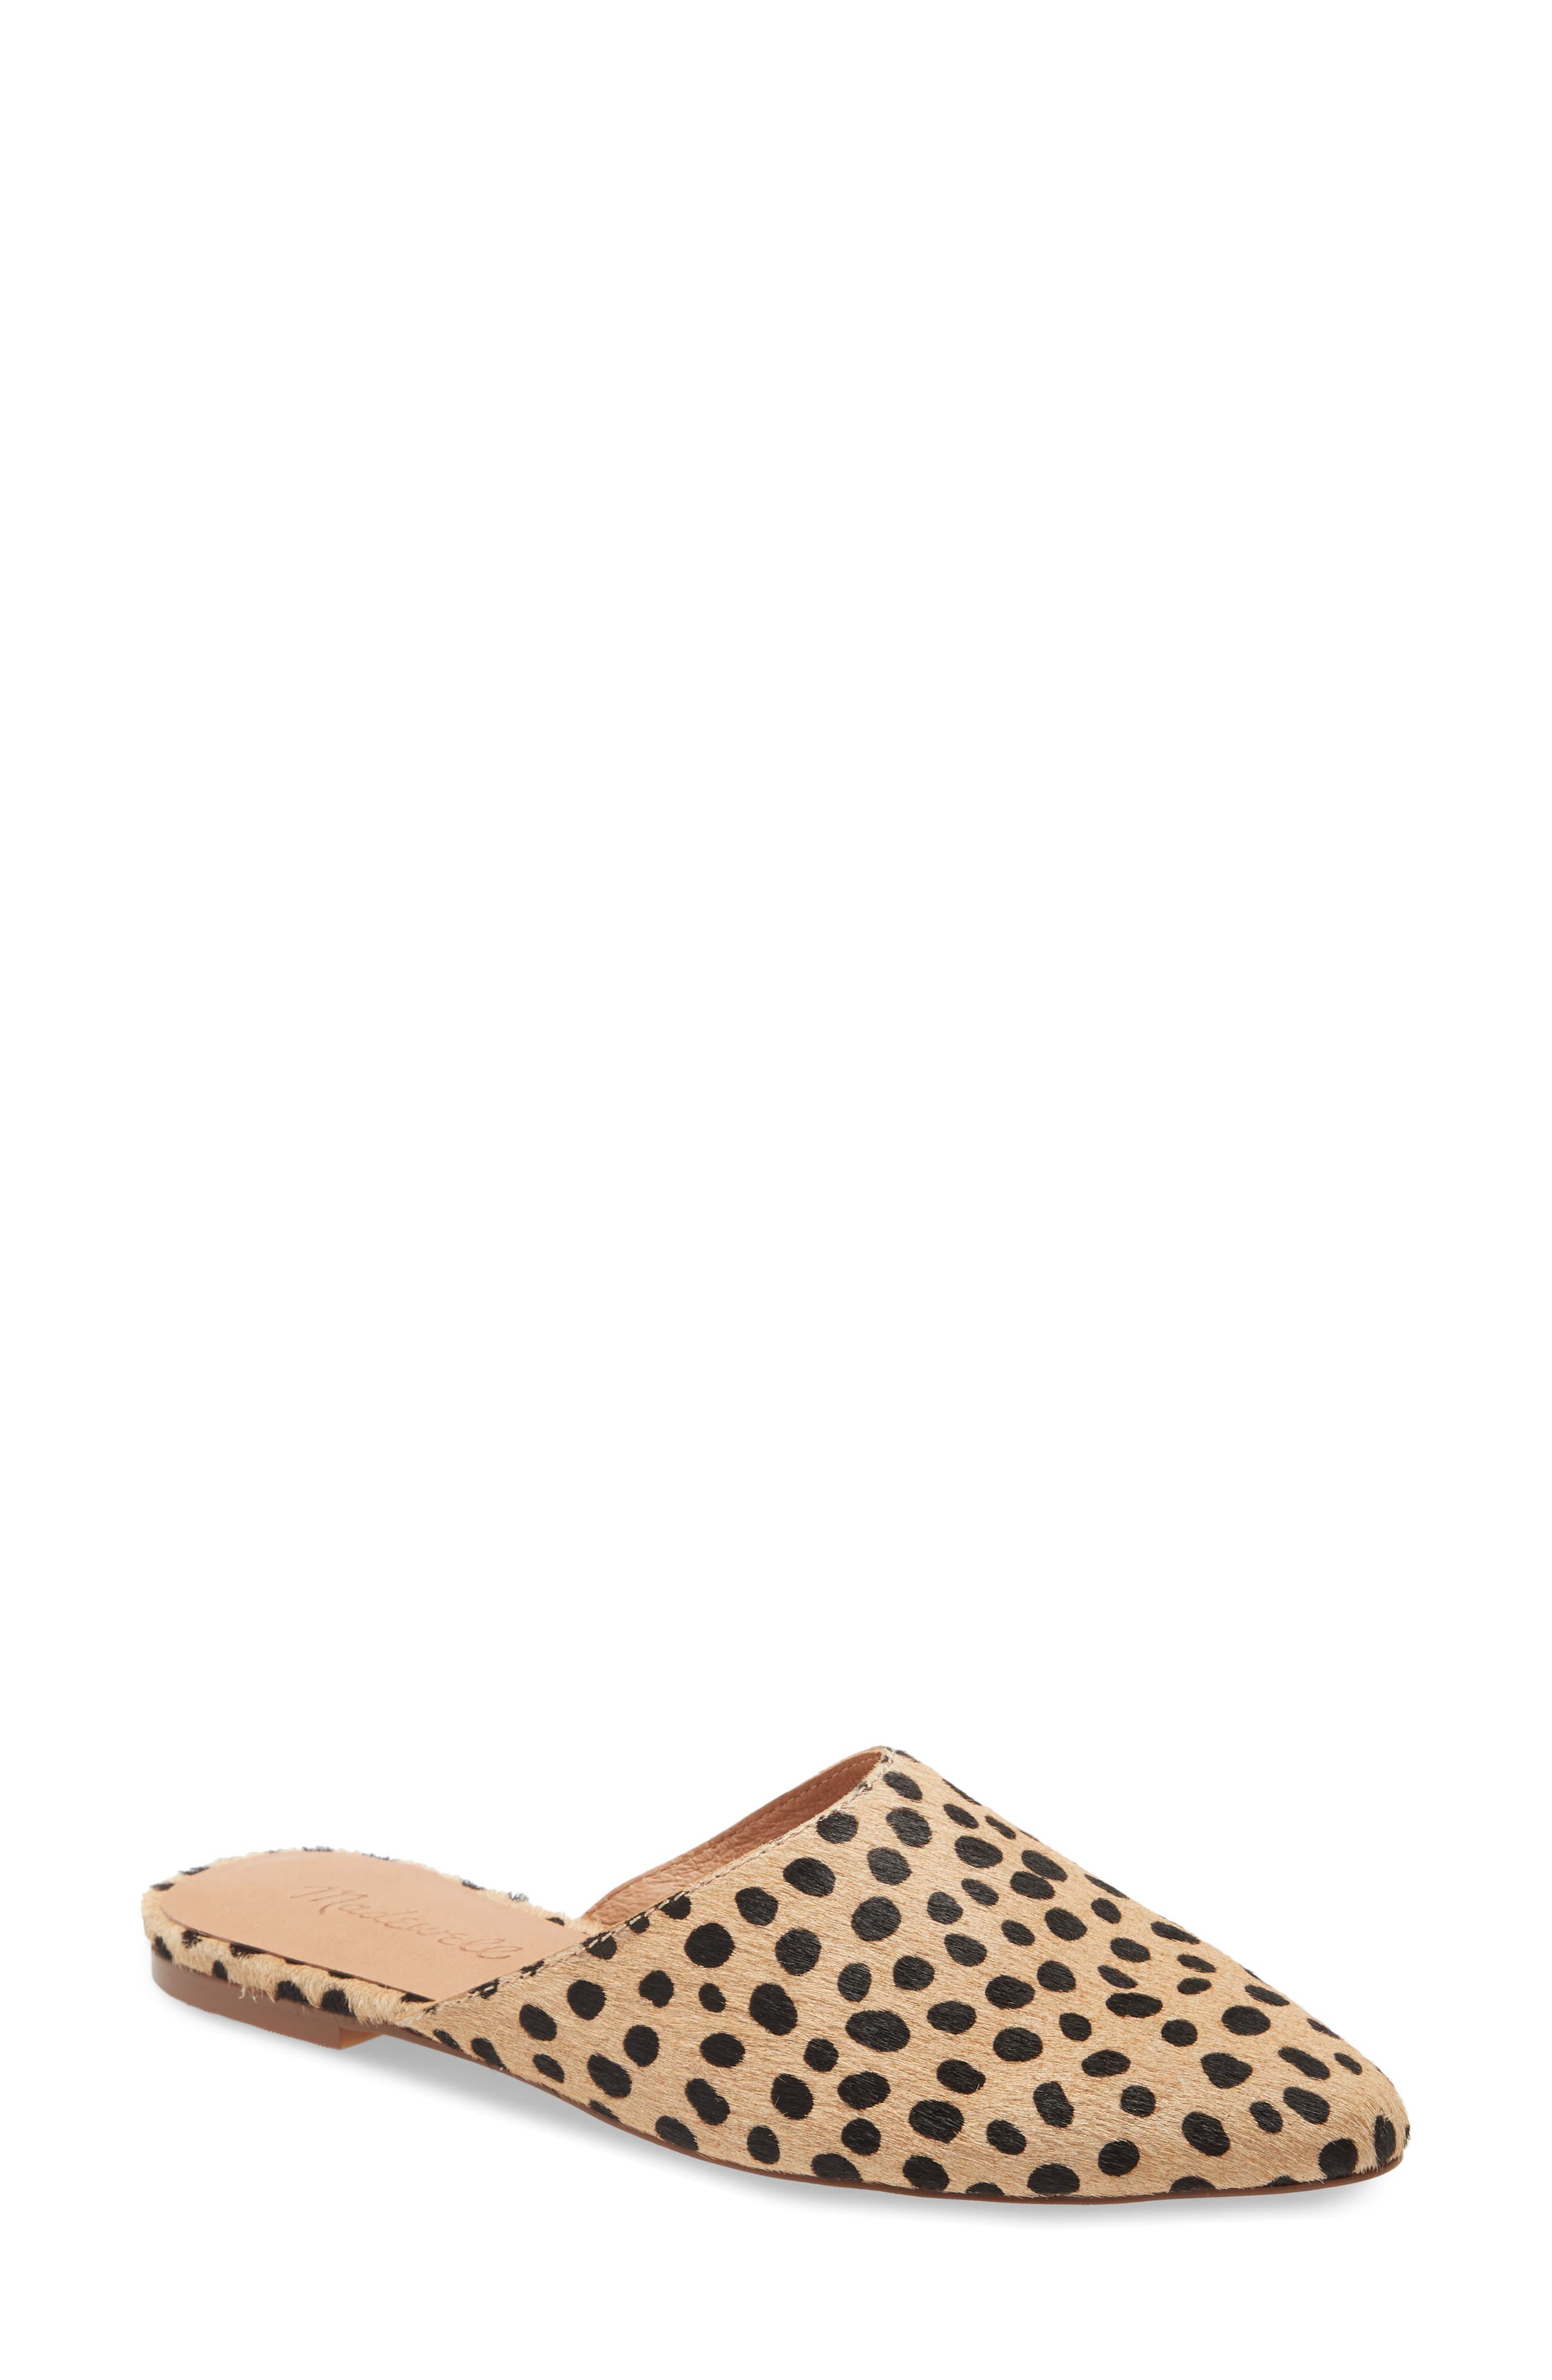 madewell mules nordstrom